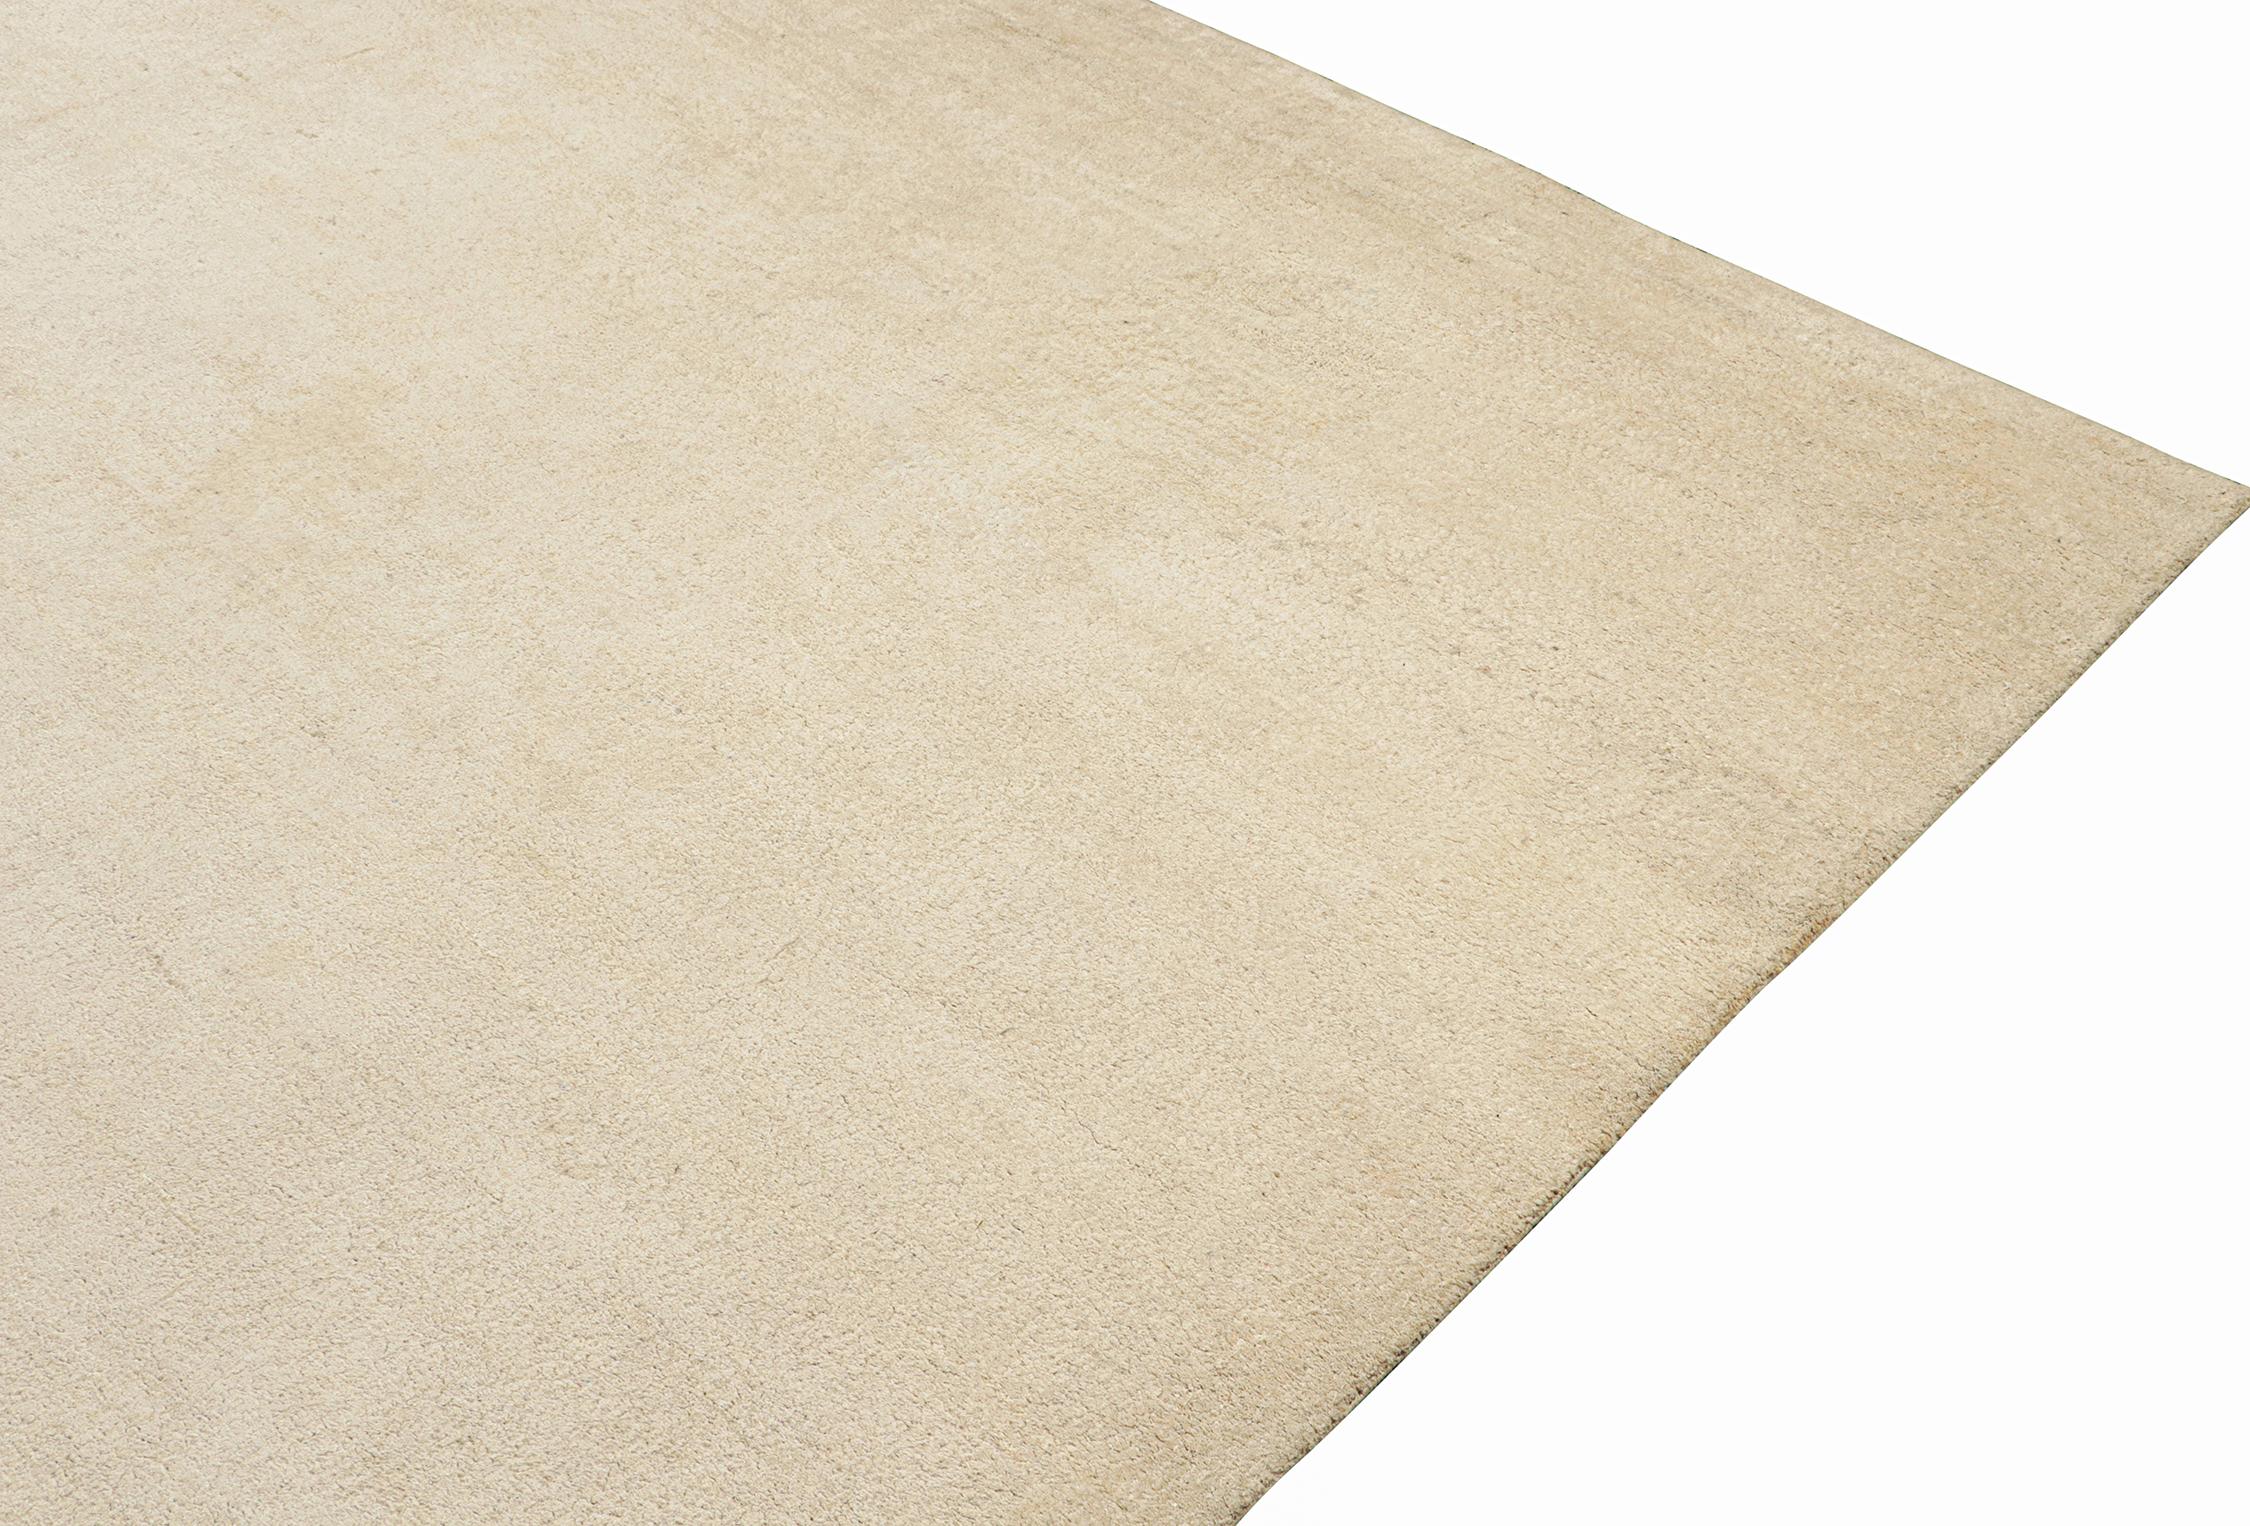 Hand-Knotted Rug & Kilim’s Solid Beige-Brown Rug in Tone-on-tone Contemporary Style For Sale